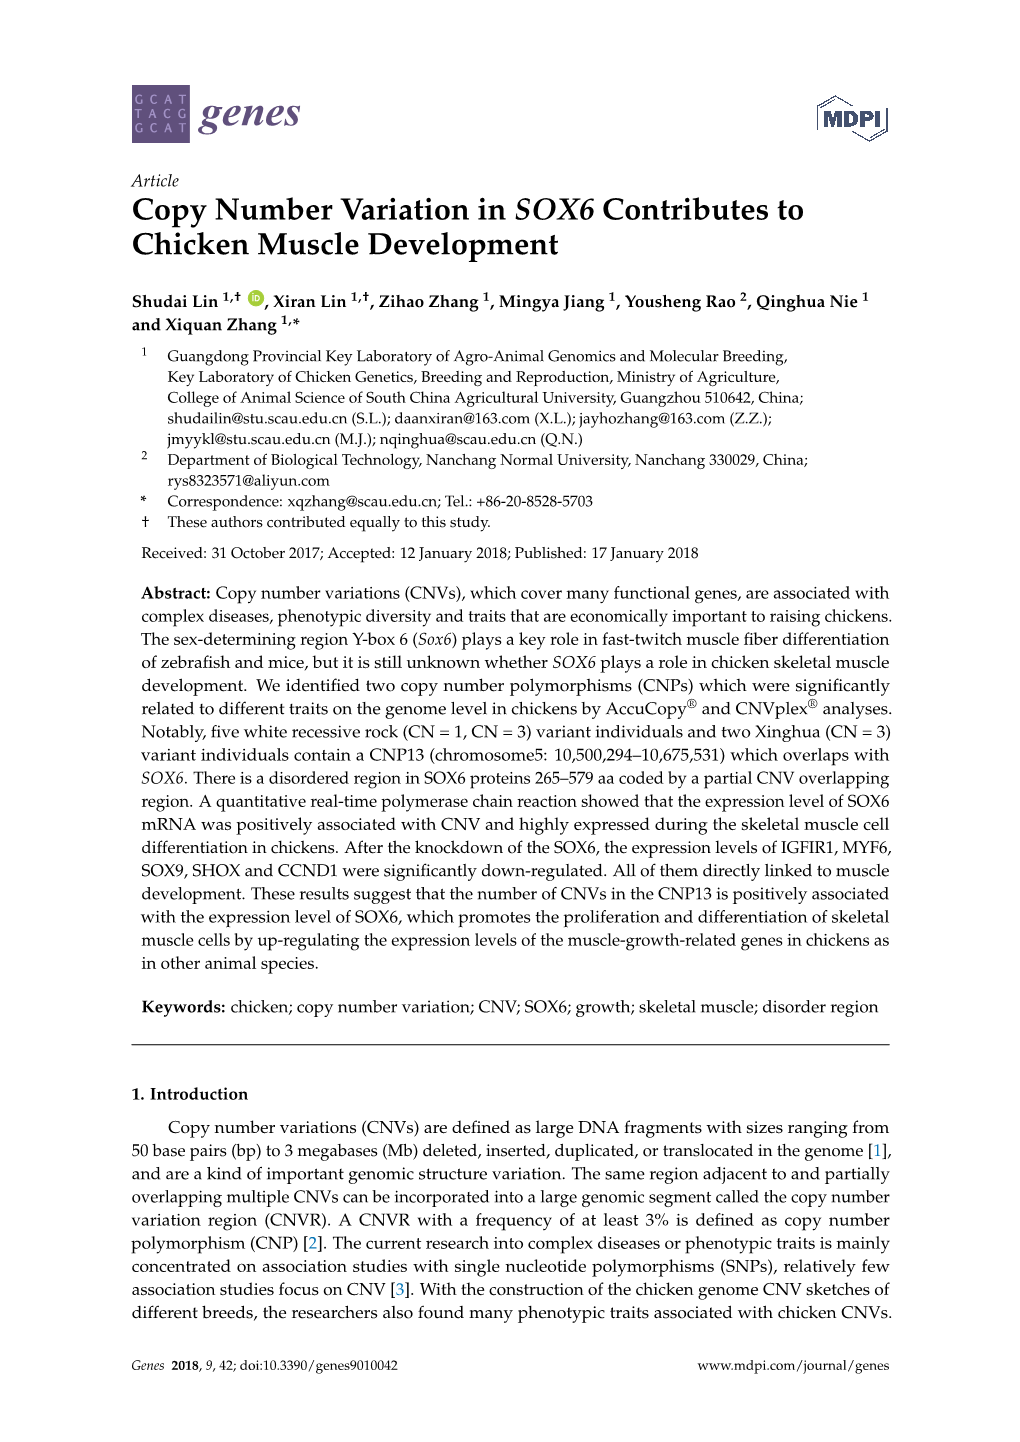 Copy Number Variation in SOX6 Contributes to Chicken Muscle Development